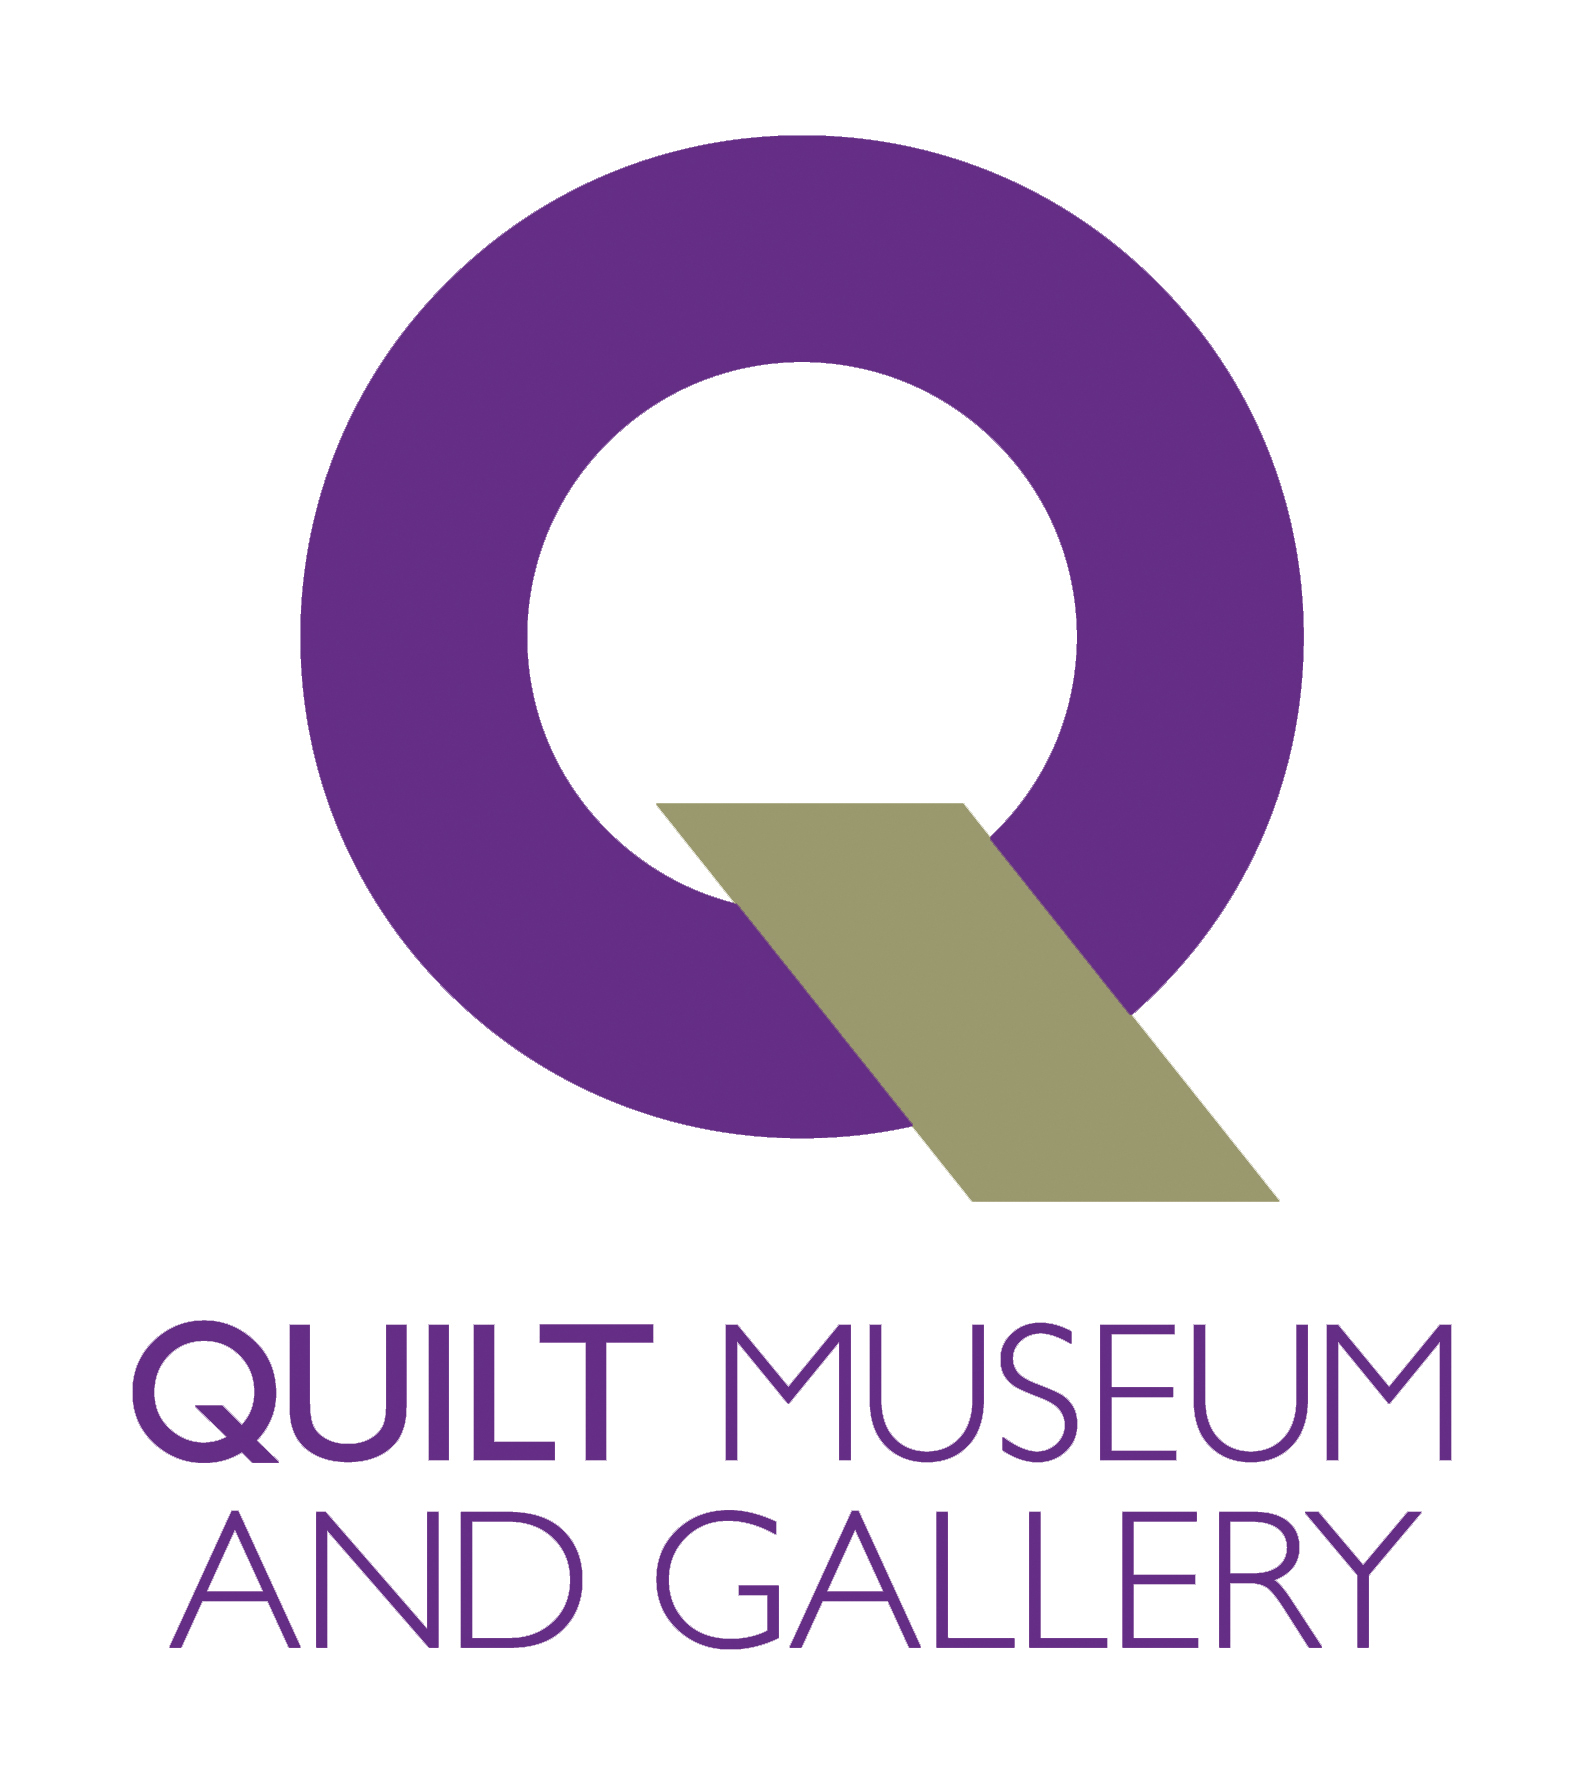 The Quilt Museum and Gallery